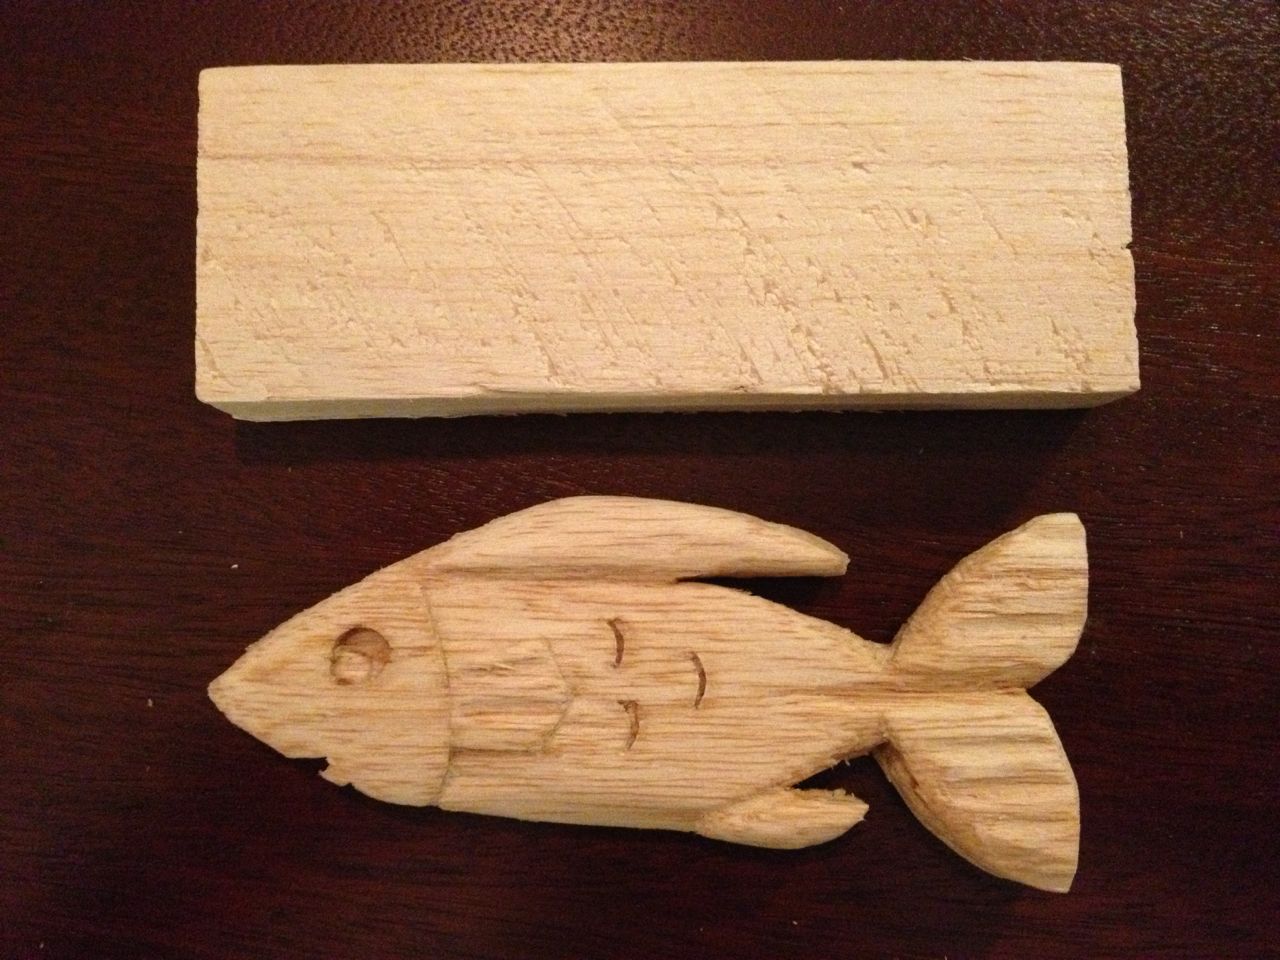 Wood Carving Projects